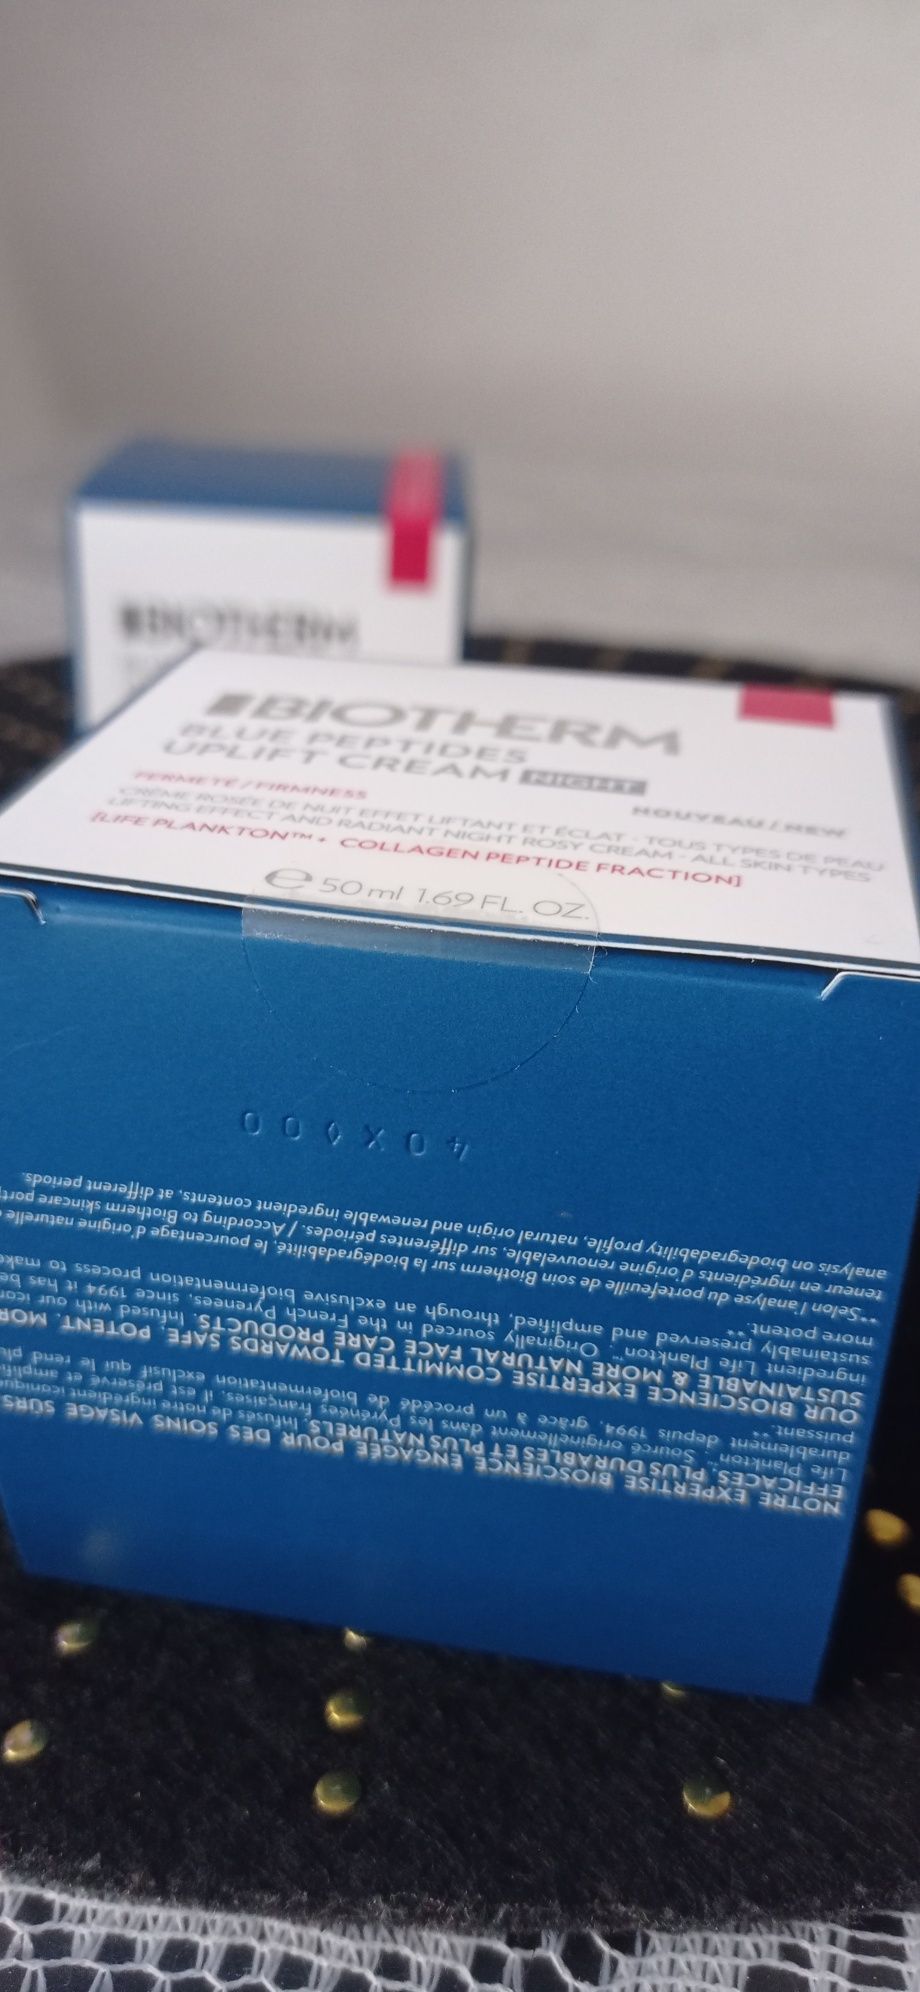 Biotherm Blue Peptides